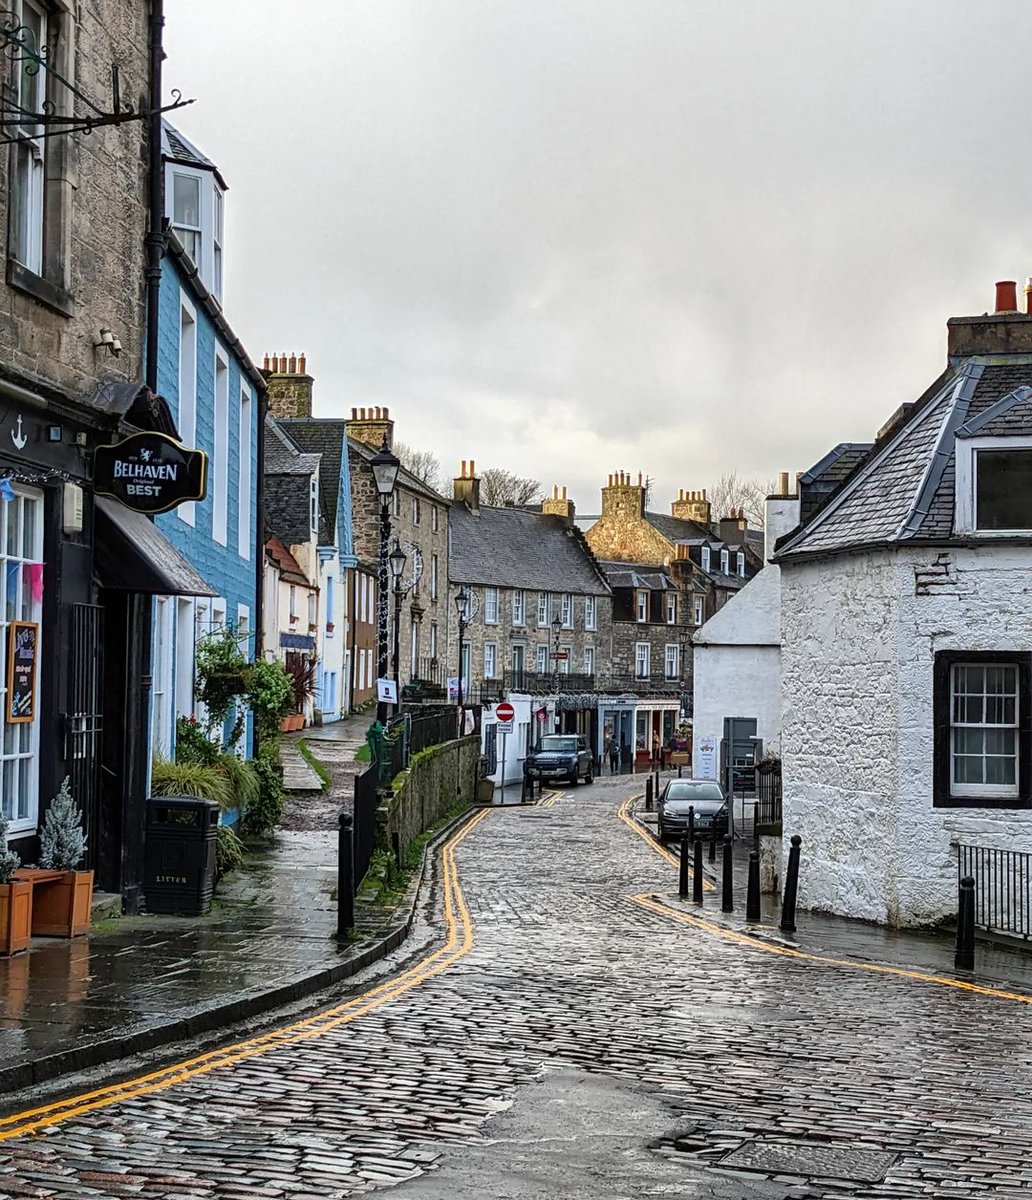 Just 30 mins by train from #Edinburgh, the charming village of #SouthQueensferry is filled with an array of independent shops & places to eat - perfect for a day out 🛍🍴
📍 South Queensferry
📸 IG/edinburgh.eye
#edinphoto #ForeverEdinburgh